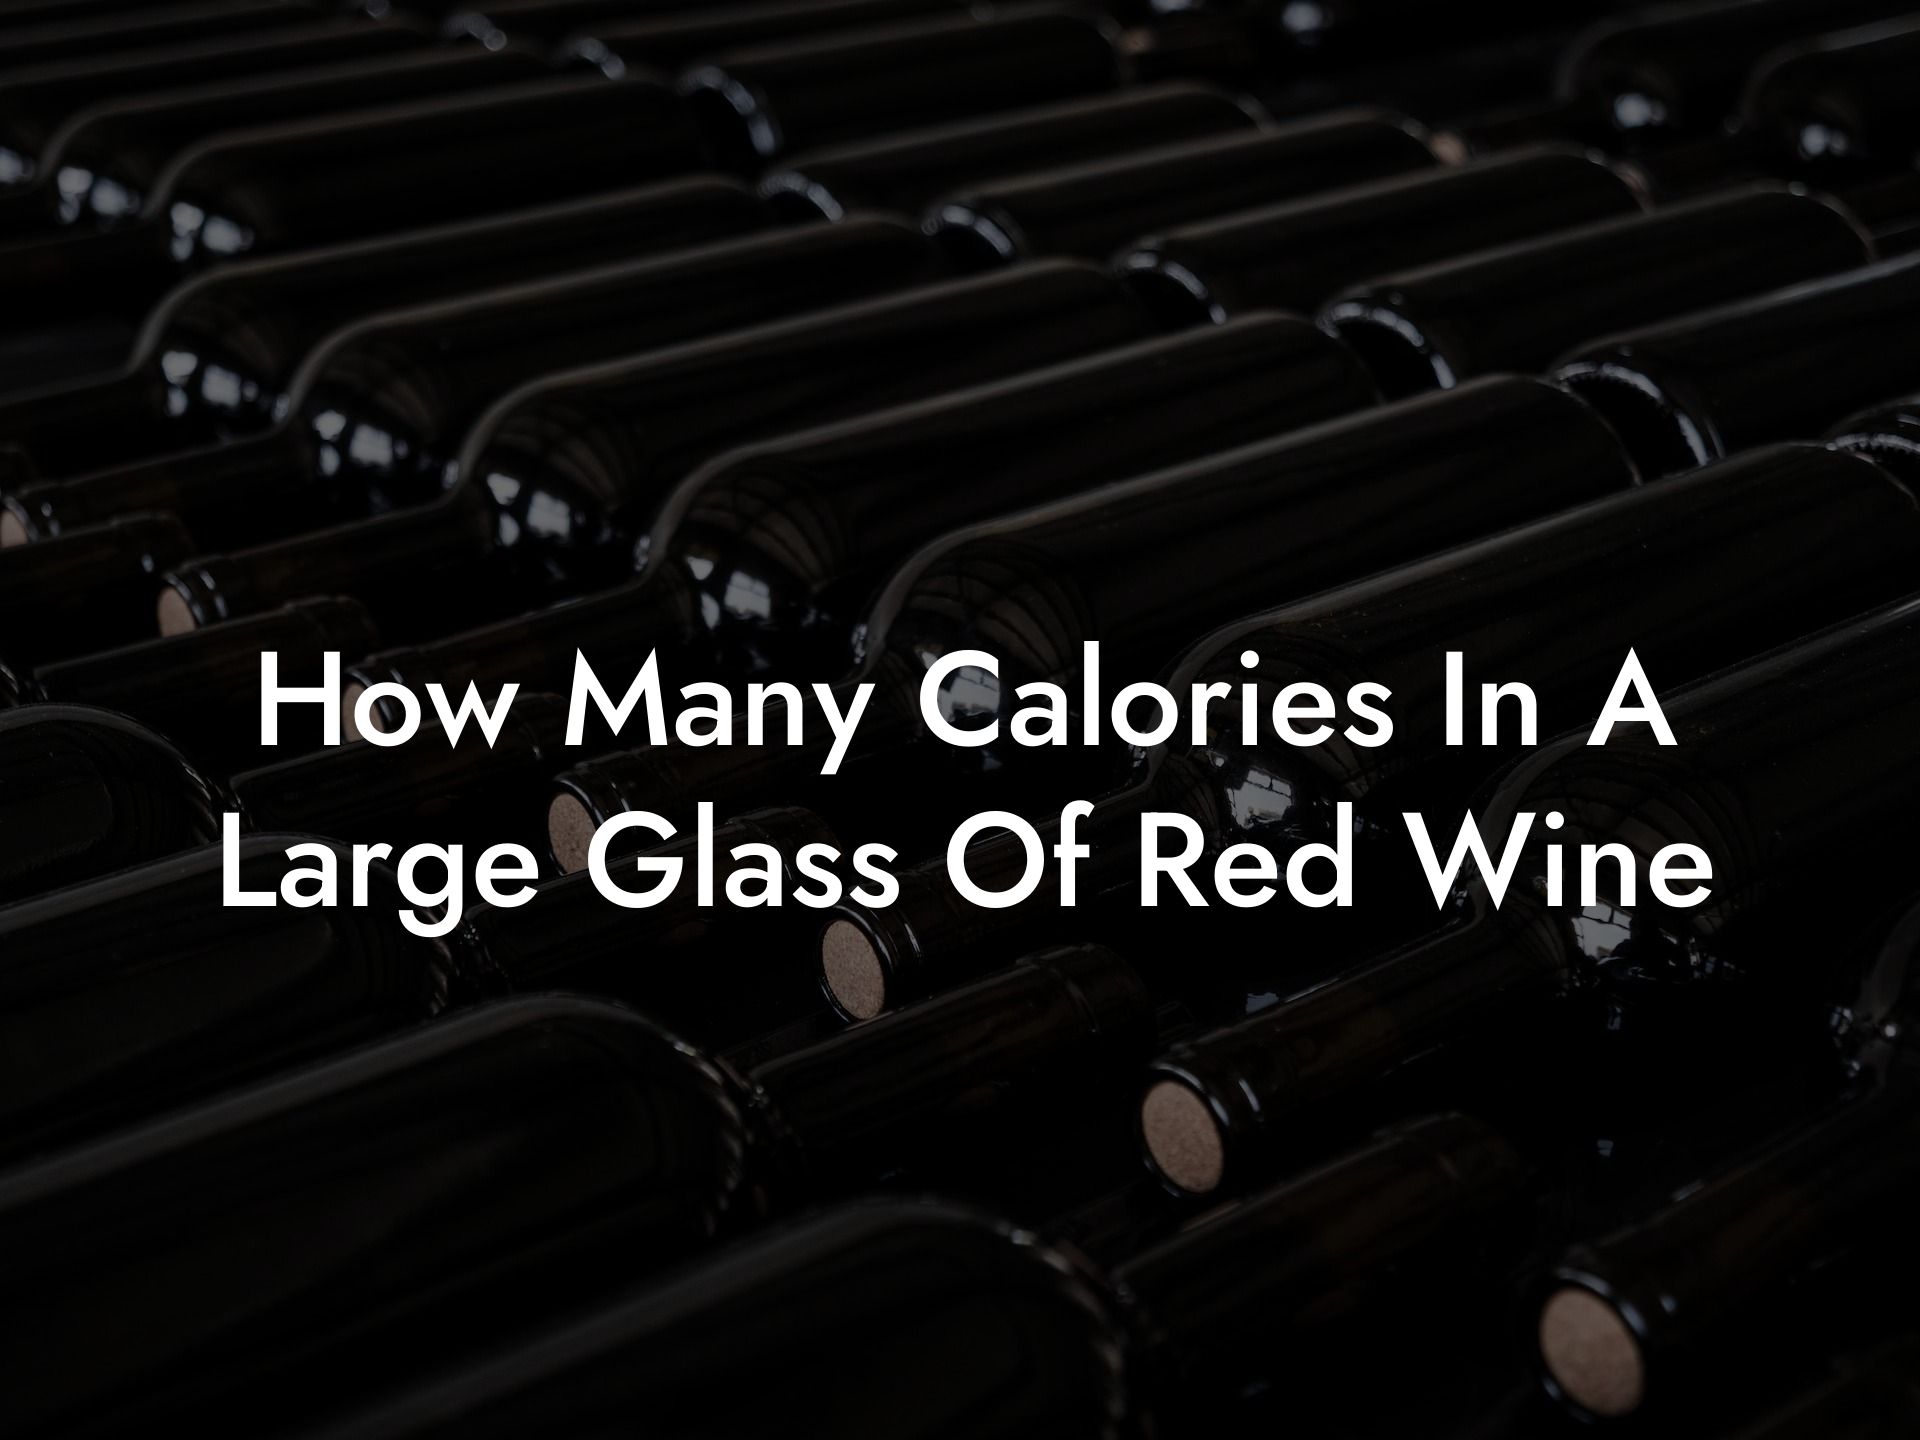 How Many Calories In A Large Glass Of Red Wine